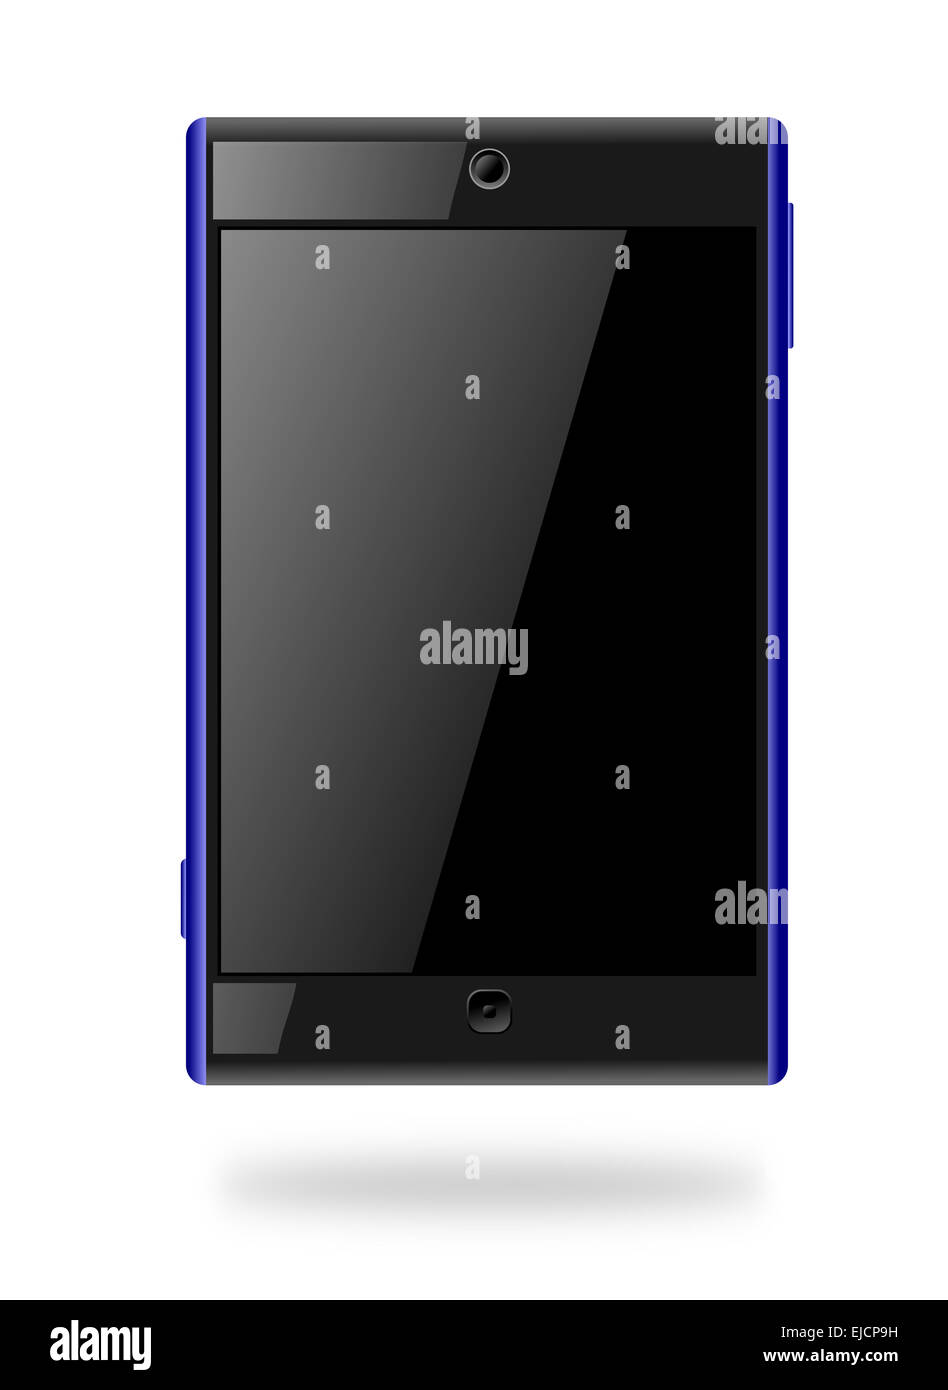 Touchscreen Smartphone with Blank Screen Stock Photo